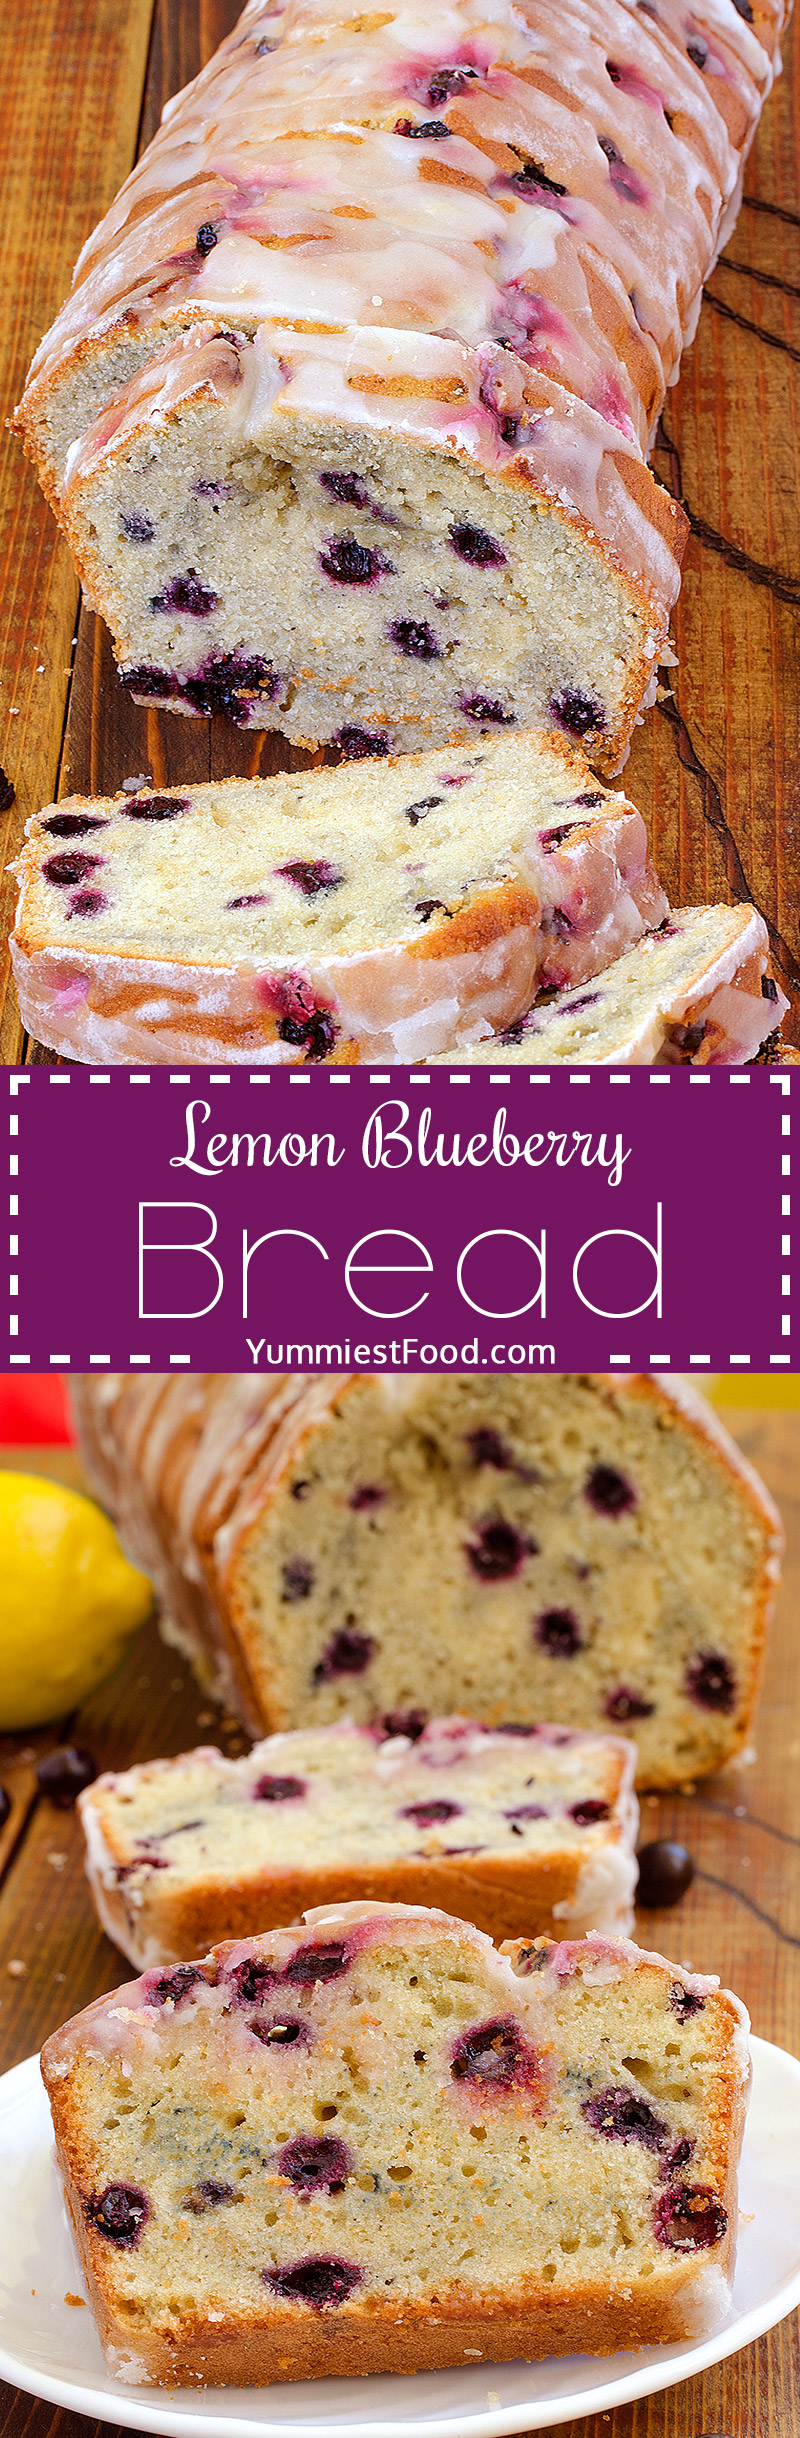 Lemon Blueberry Bread is quick, delicious and easy to make.